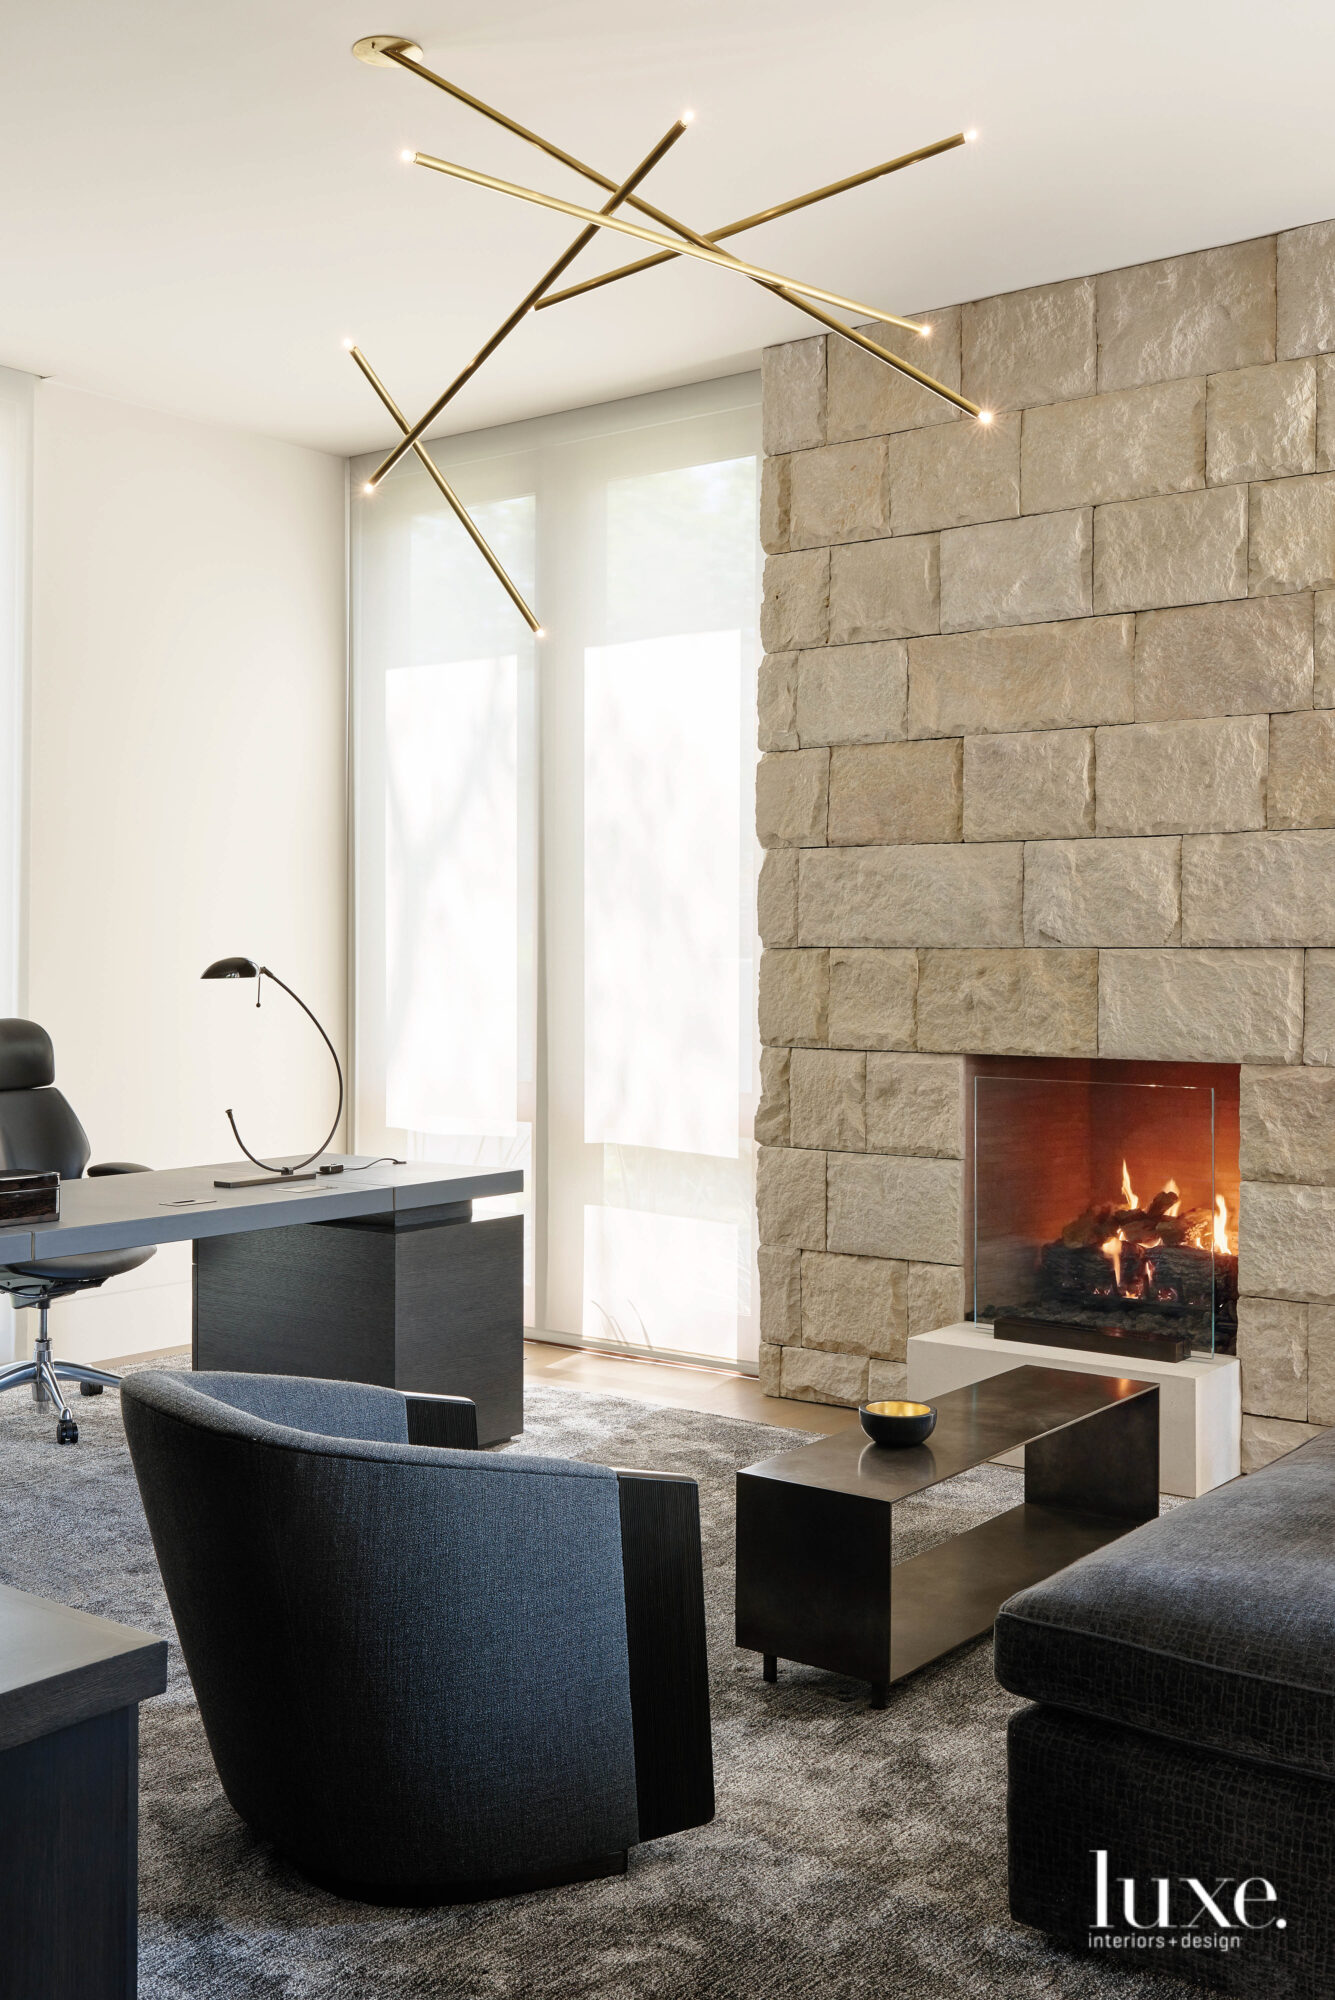 A fireplace nook is carved out in the accented stone wall in this home office space.